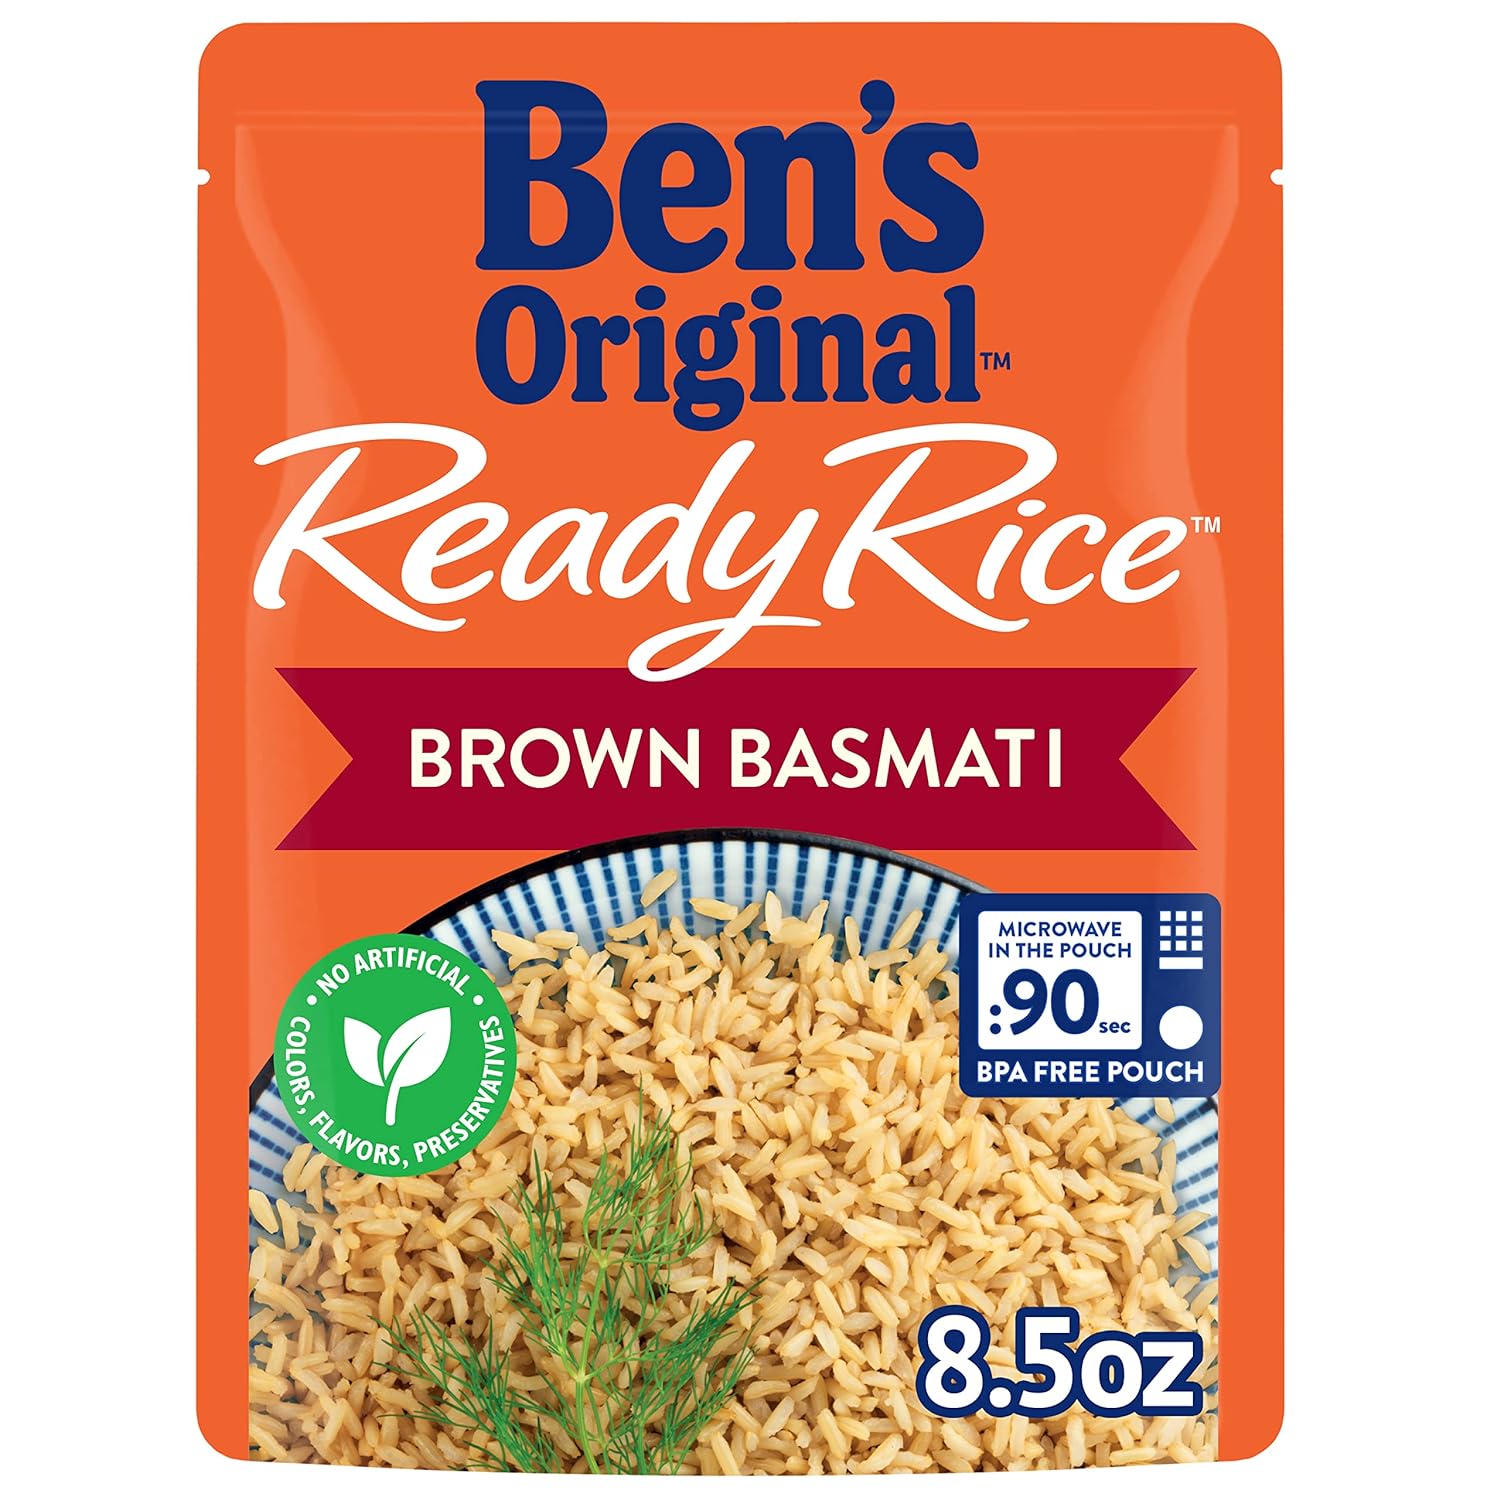 BEN'S ORIGINAL Ready Rice Brown Basmati Rice, Easy Dinner Side, 8.5 OZ Pouch (Pack of 12)